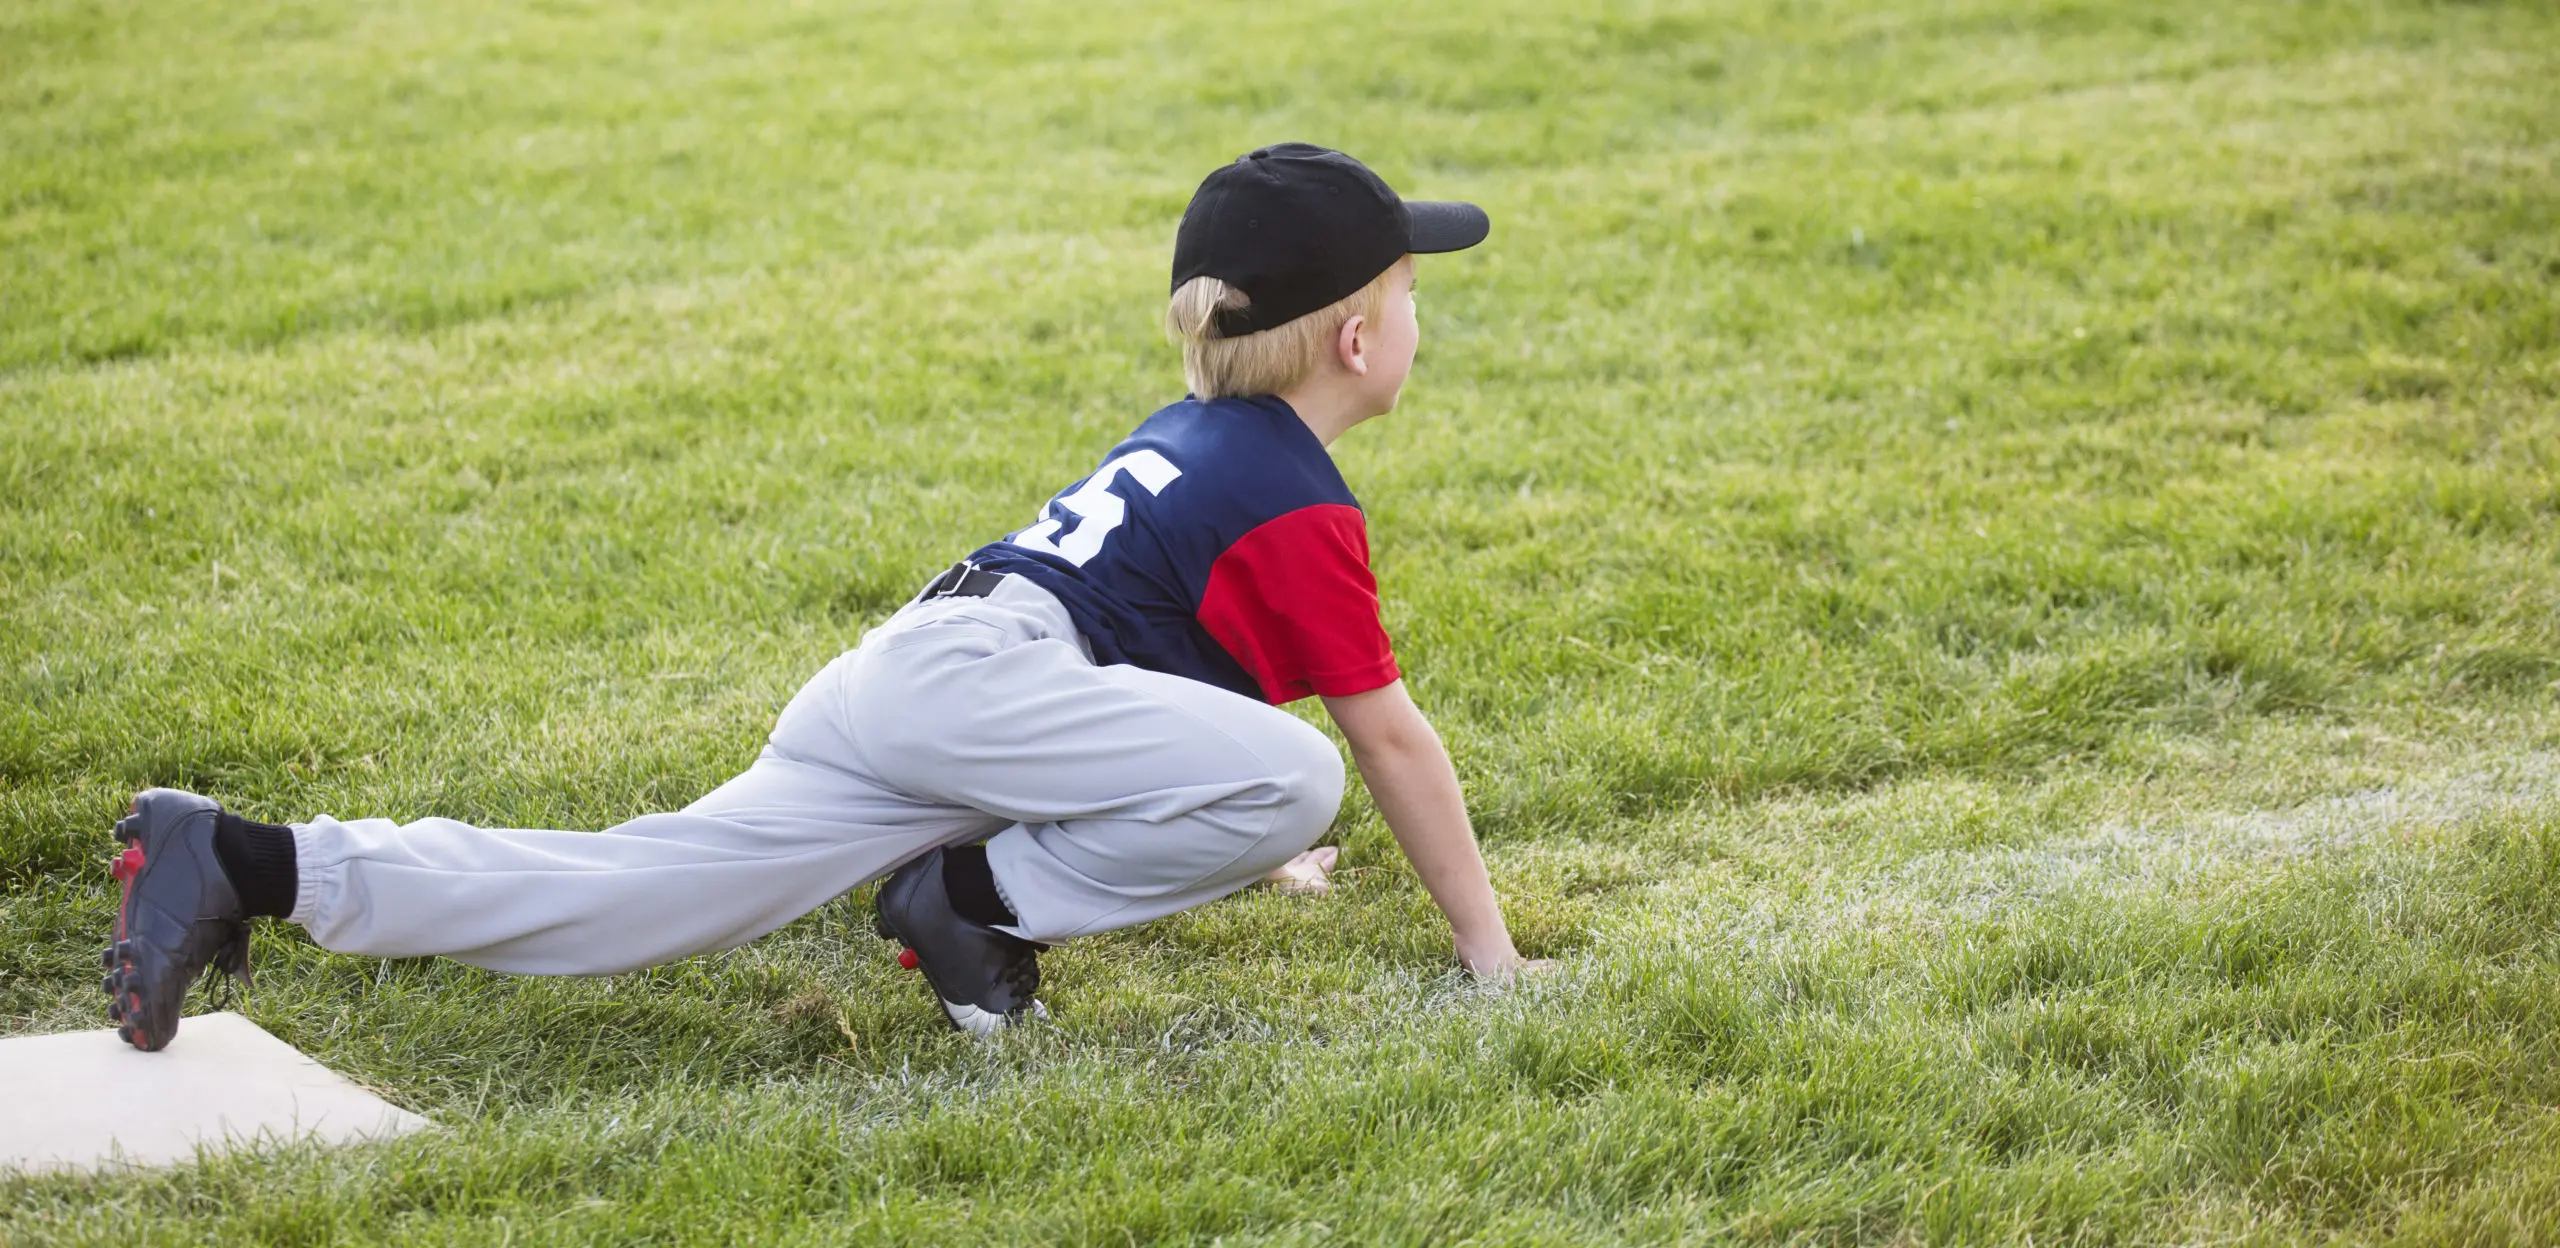 Featured image: Improve Your Baseball & Softball Performance With These 4 Stretches